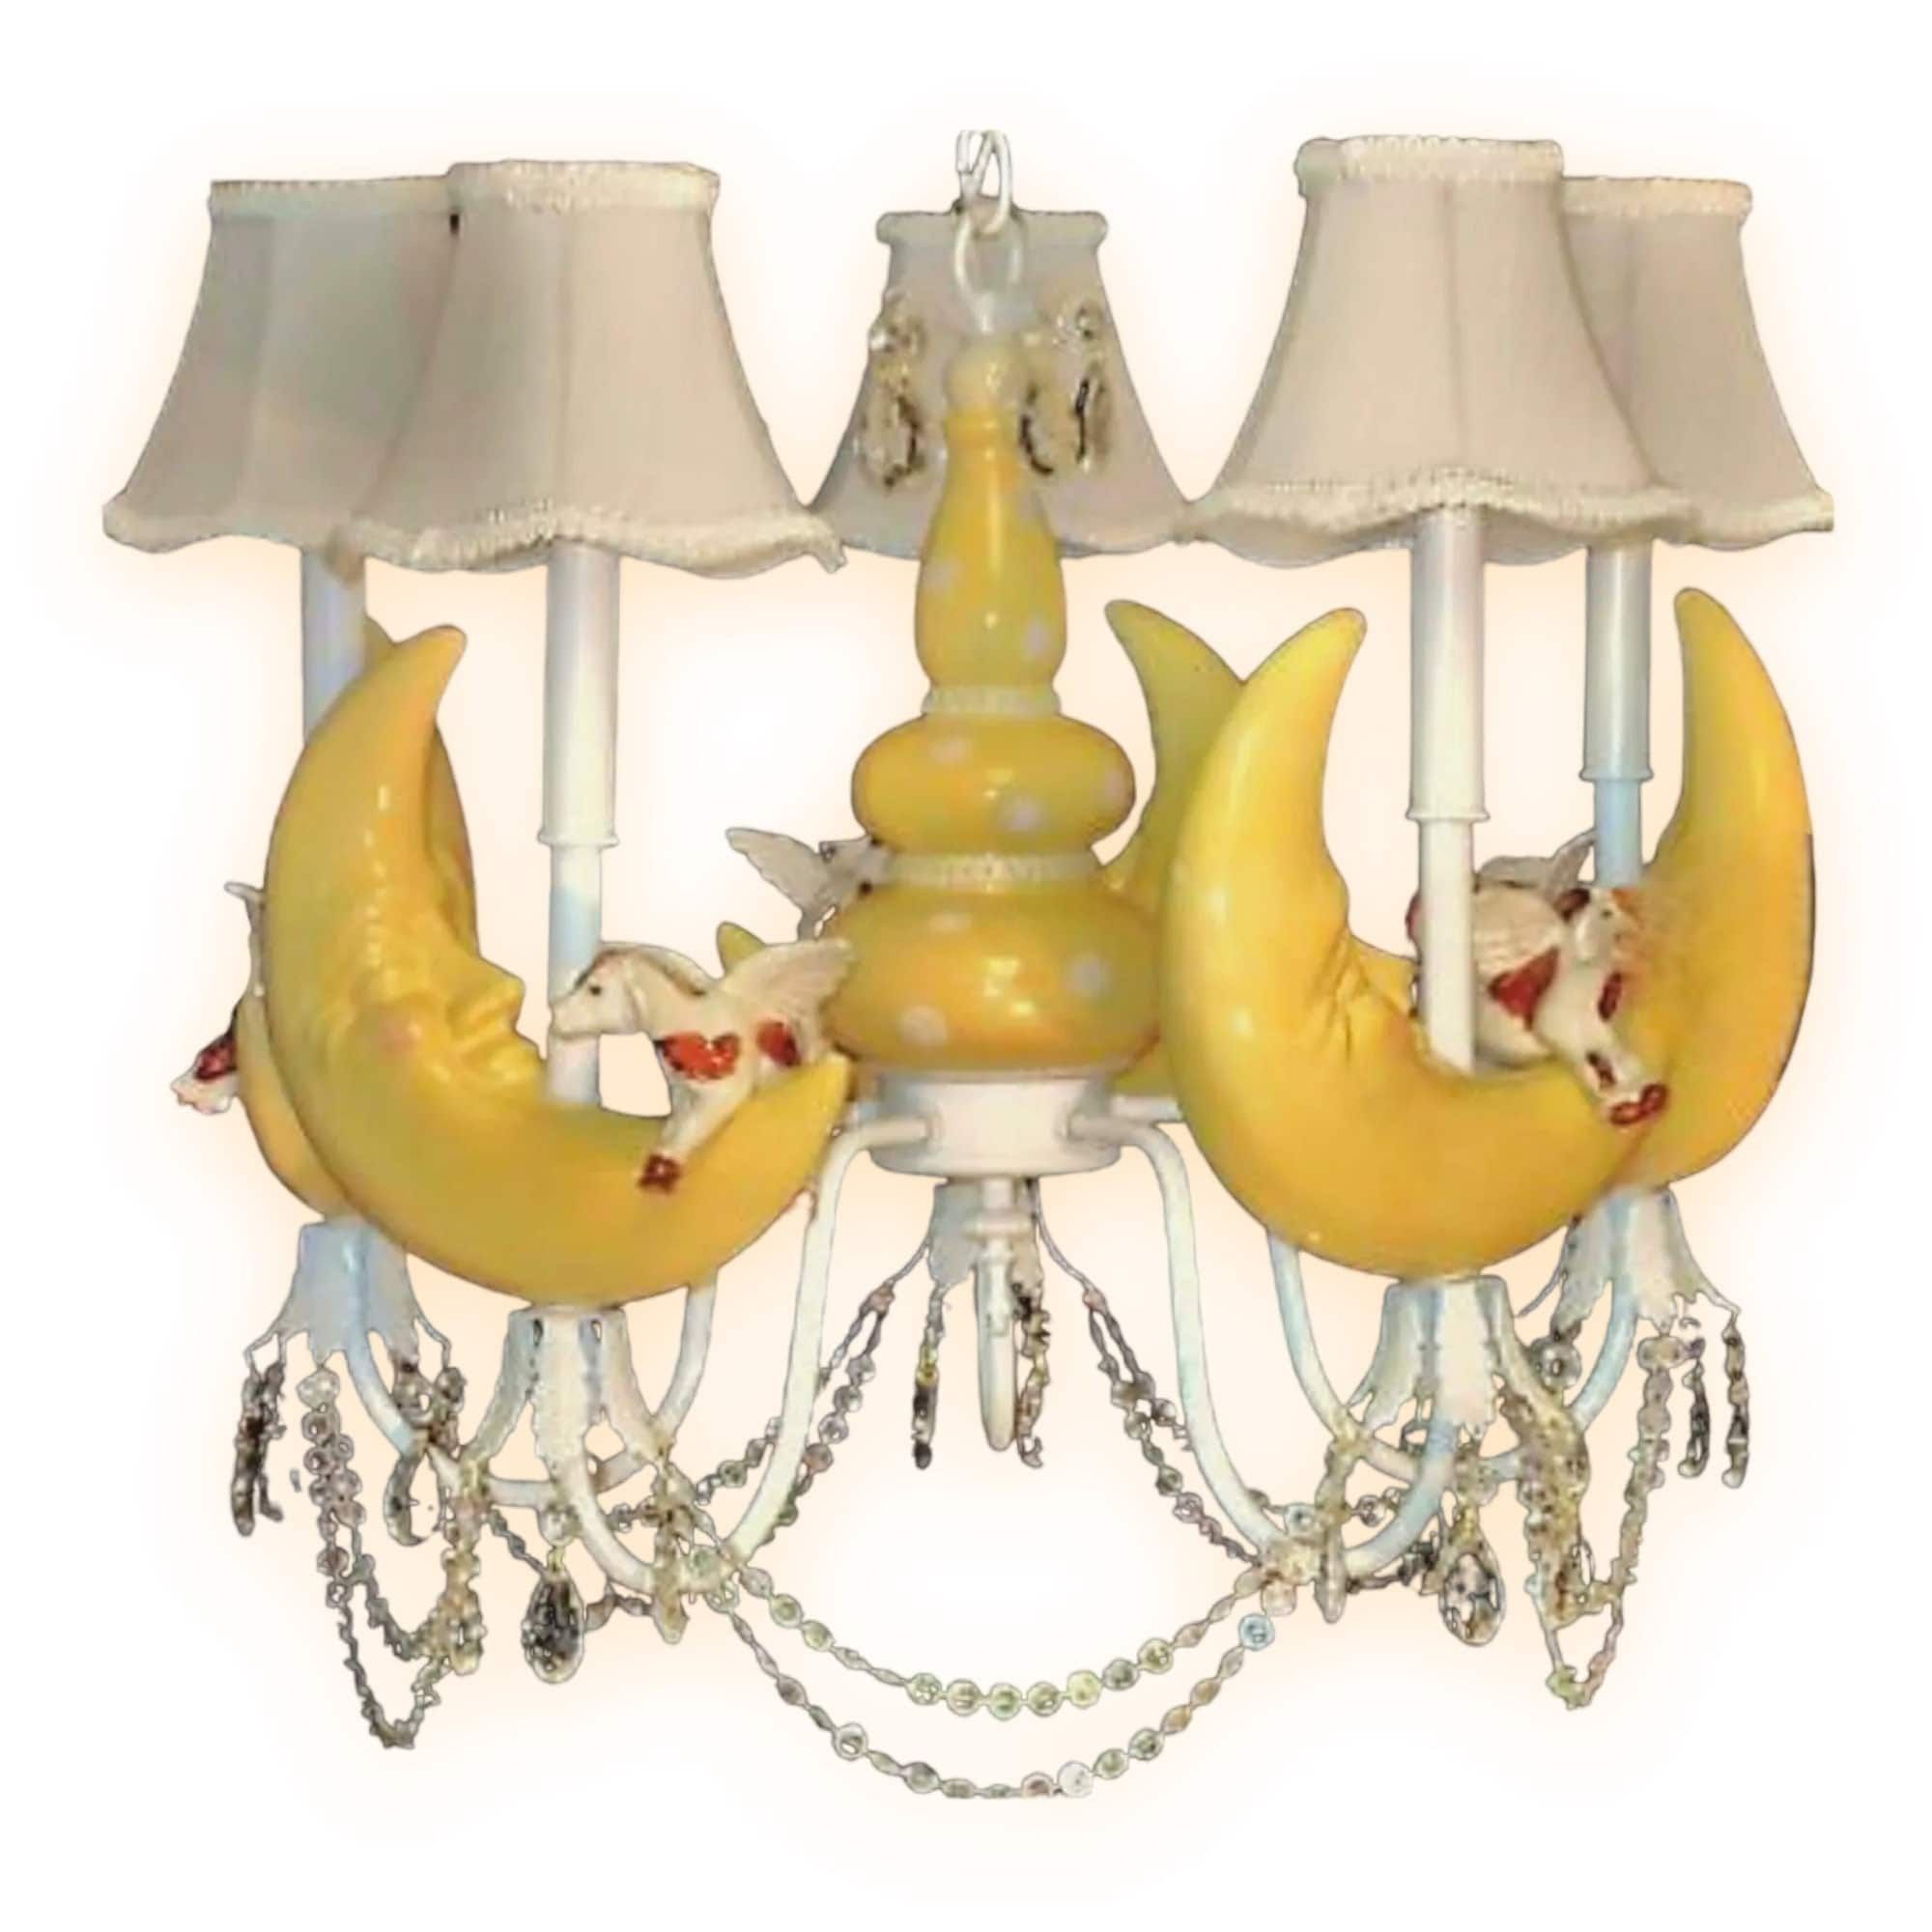 Chandelier Shades Elegant and Stylish Lighting Accessories for Your Chandelier